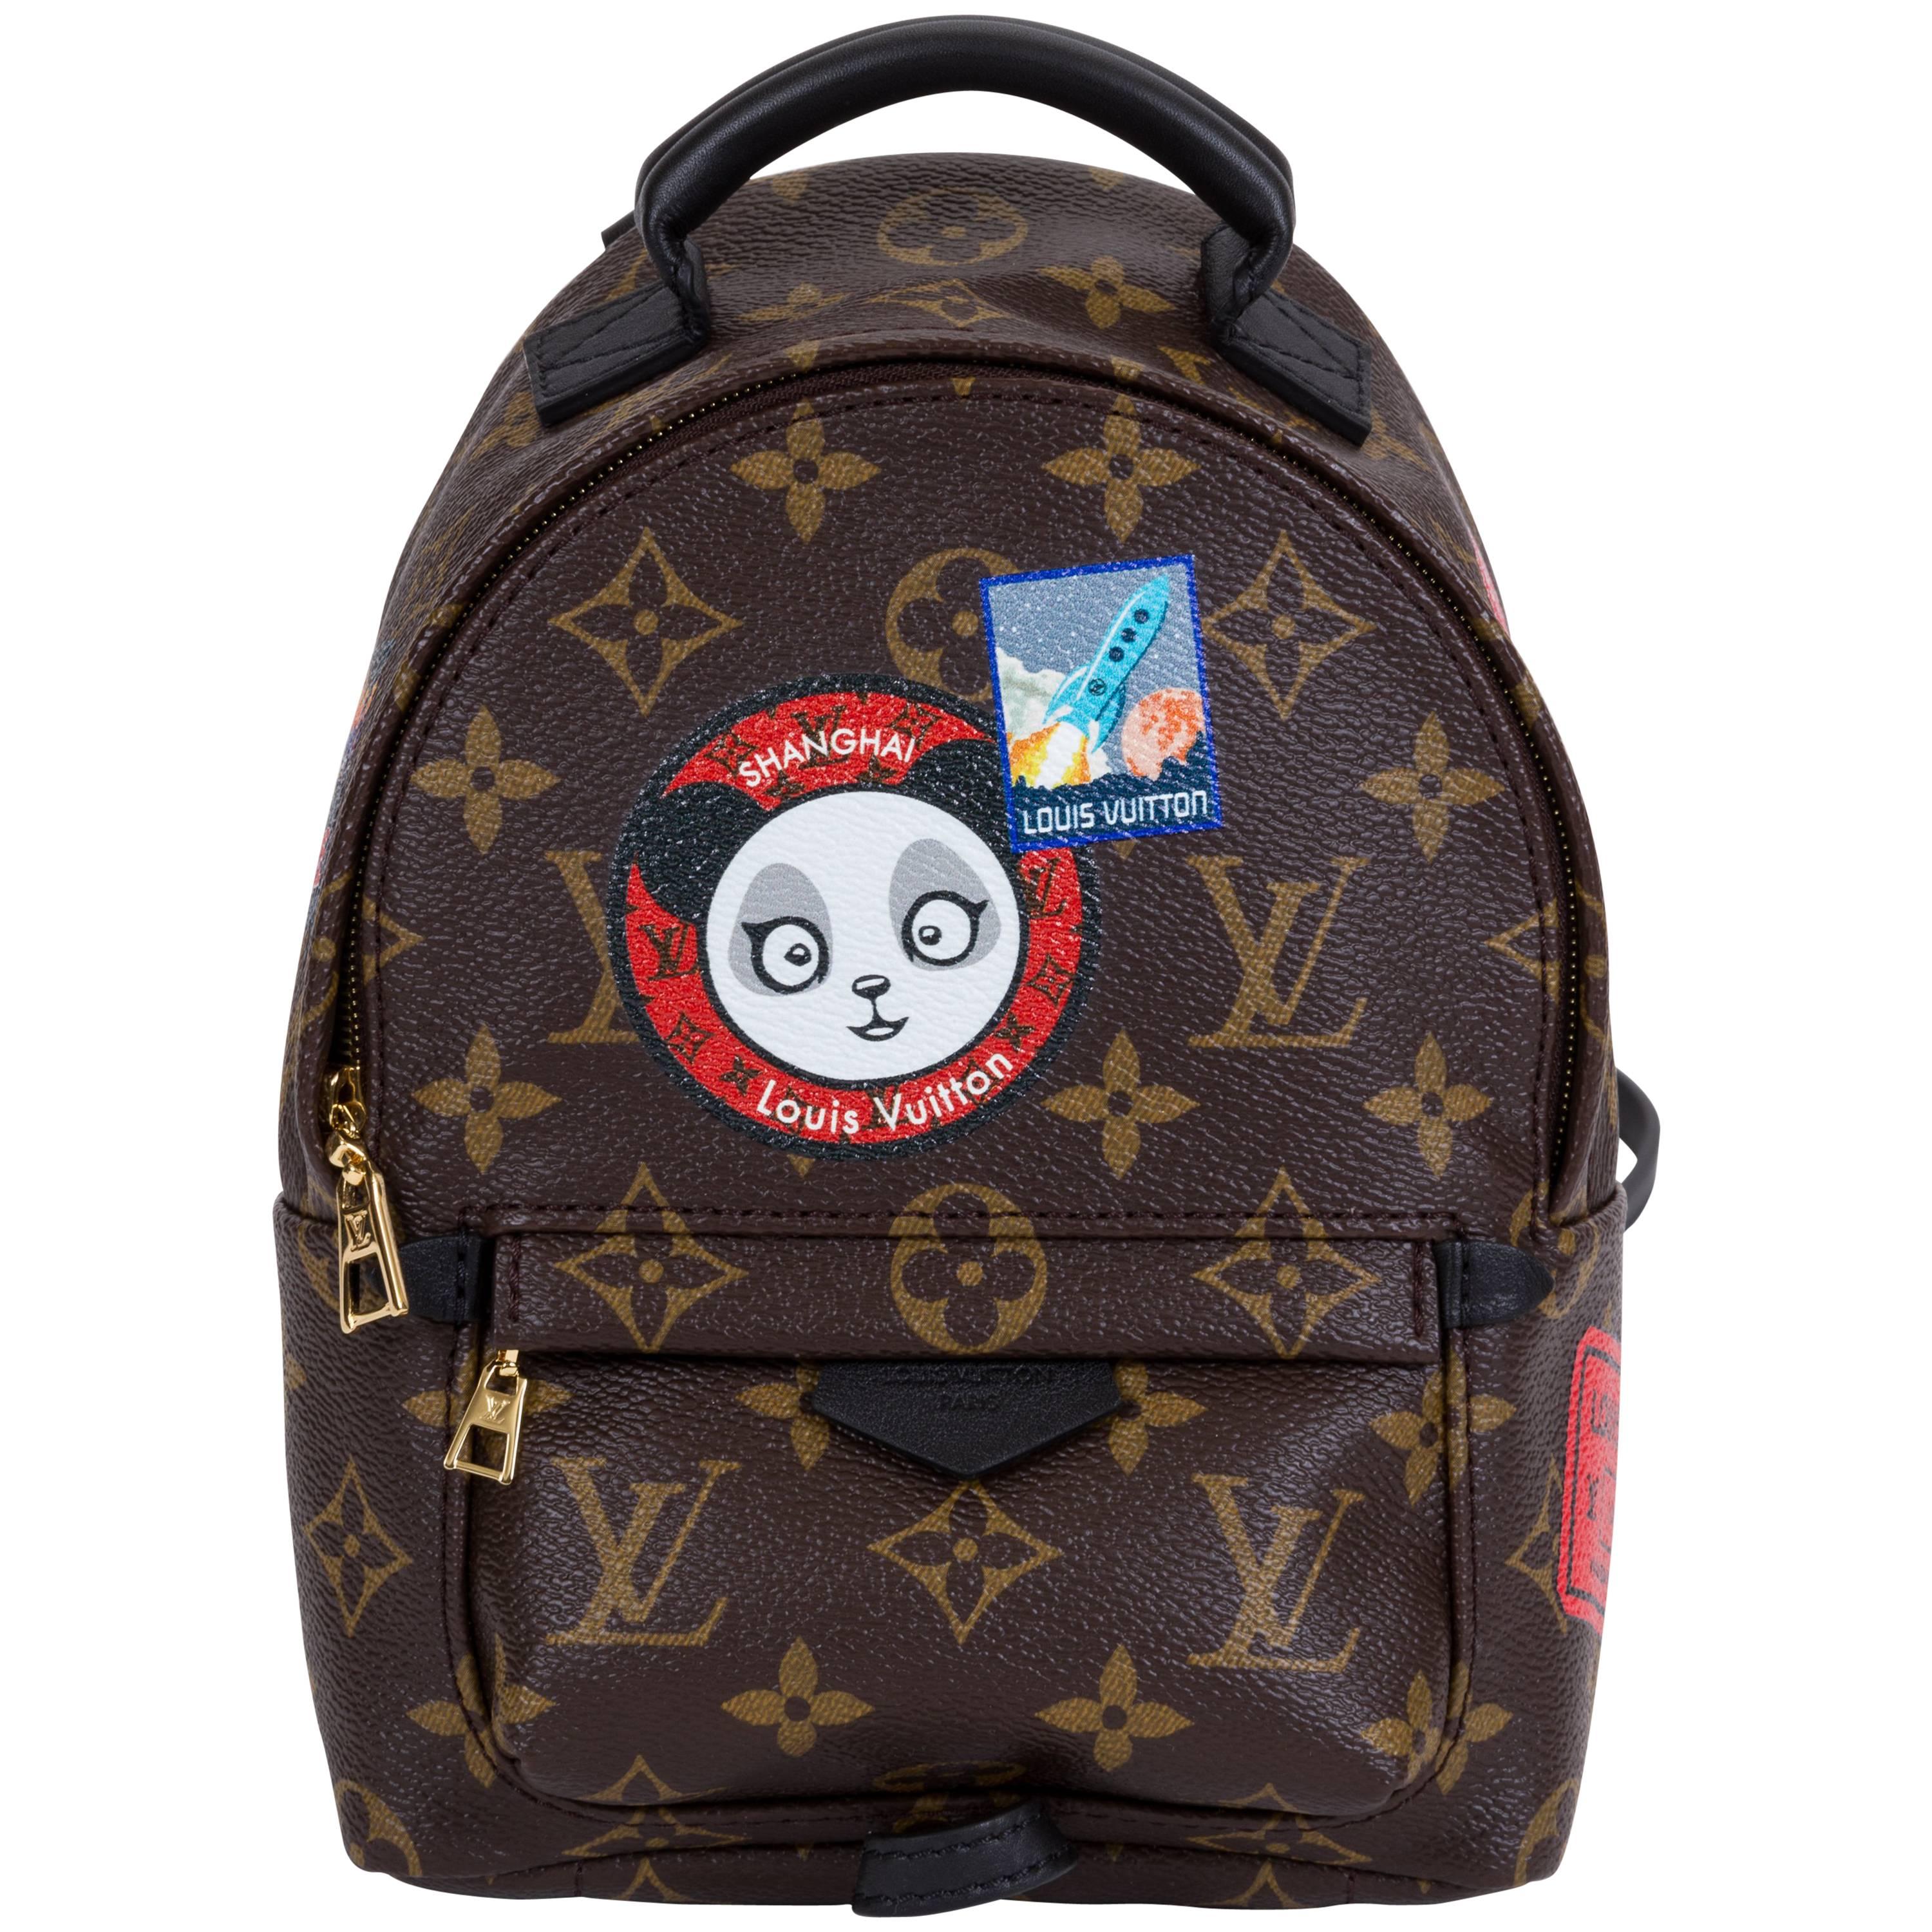 SOLD OUT New Vuitton Unique Mini Palm Spring Backpack Bag